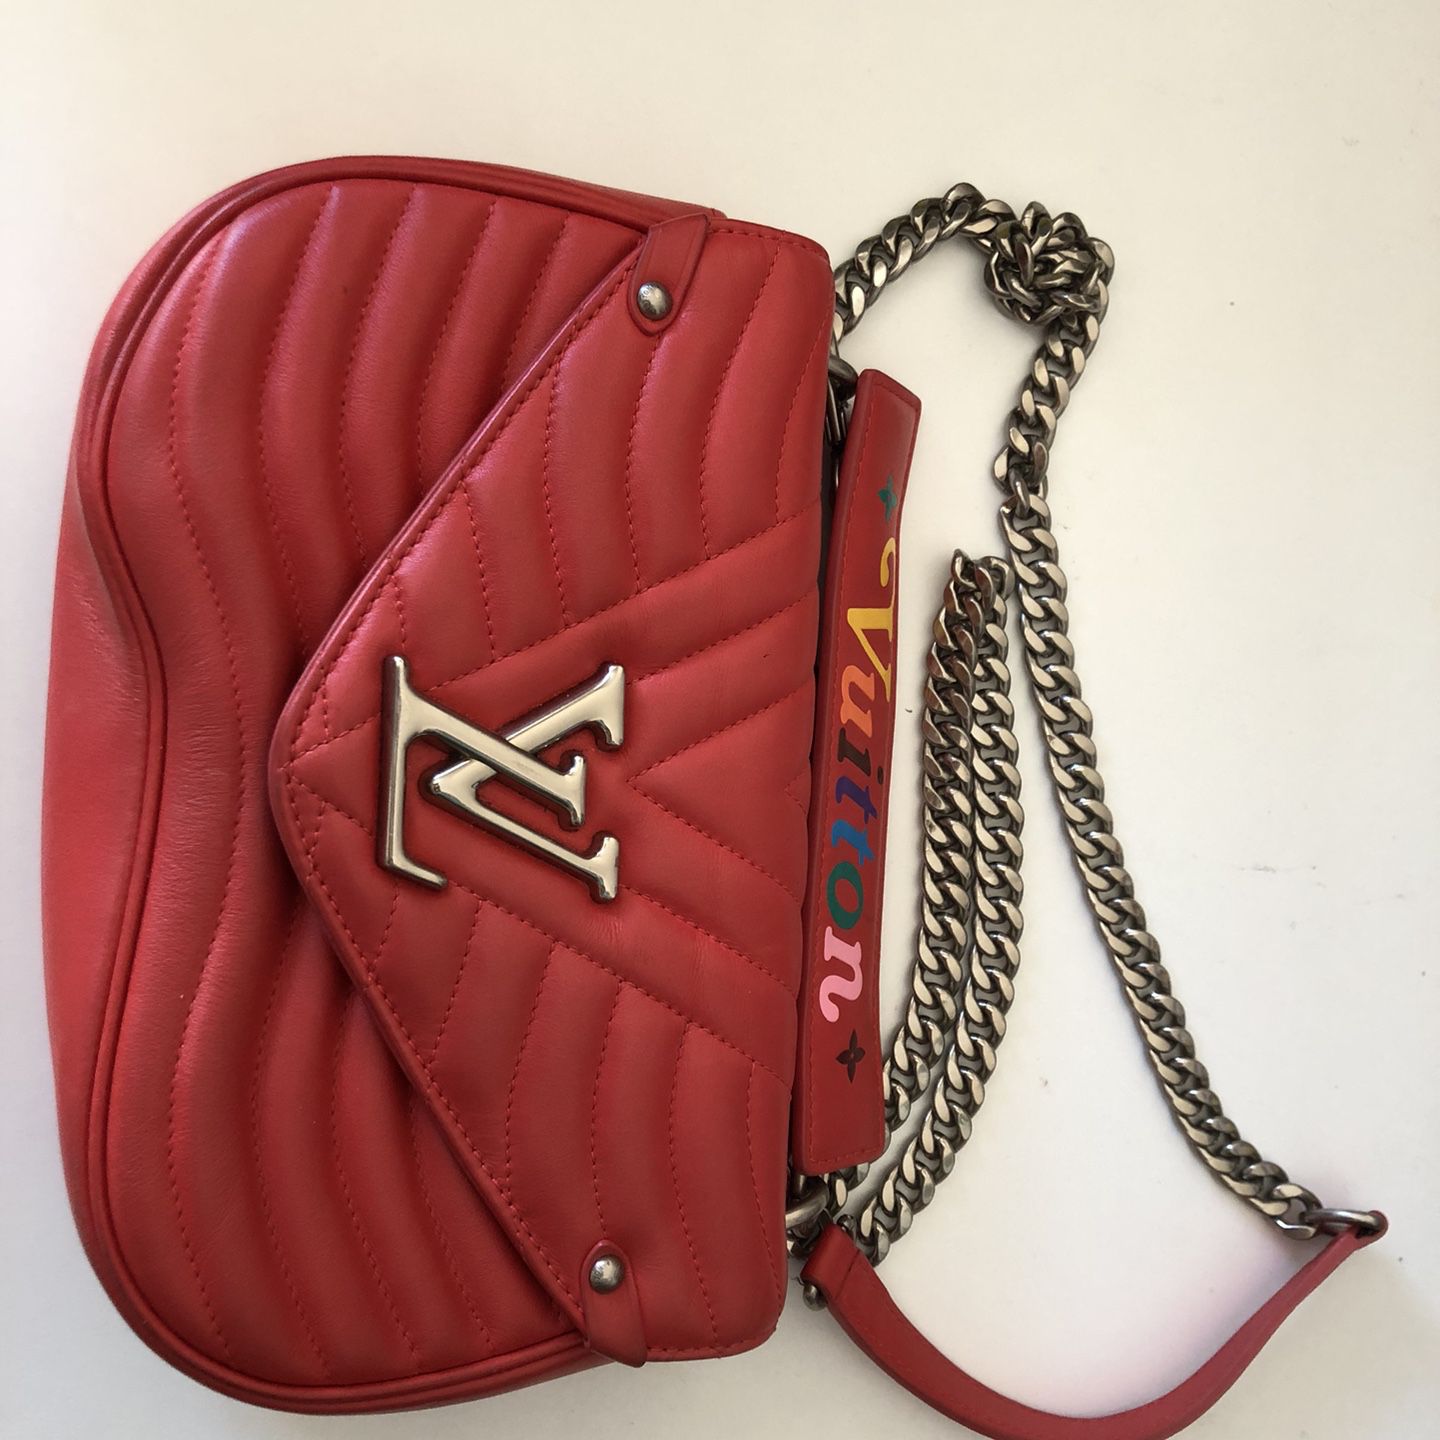 Louis Vuitton Large Bag for Sale in Hollywood, FL - OfferUp